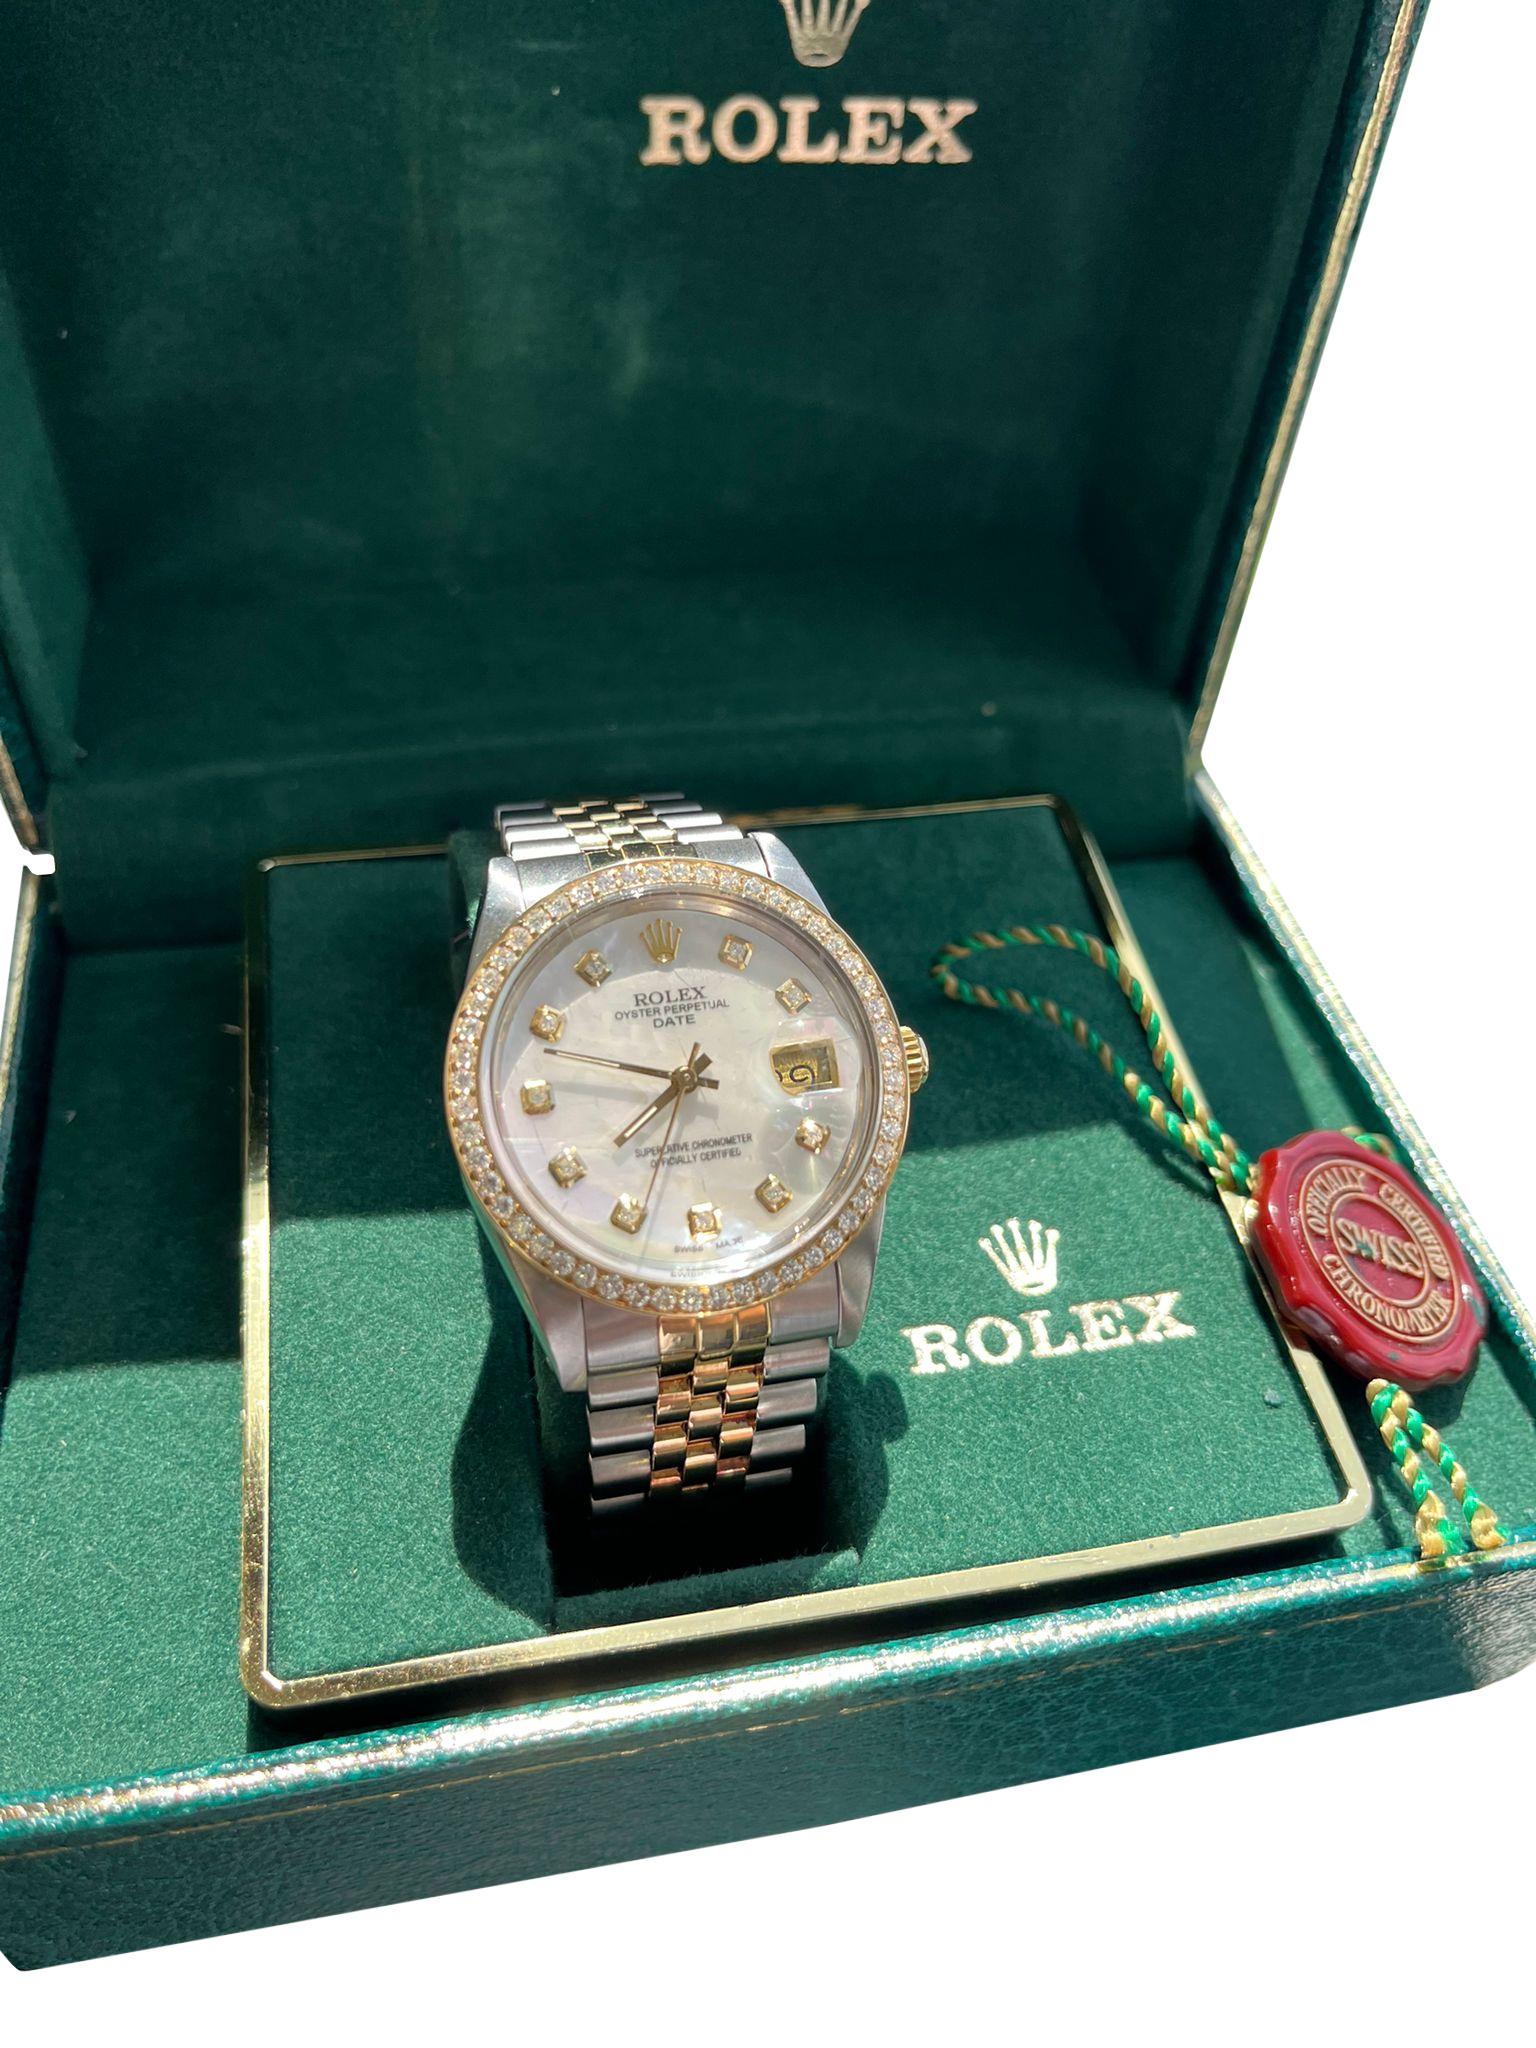 Rolex Oyster Perpetual Date 34mm MOP Diamond Dial Bezel Two-Tone Watch 15053 In Good Condition For Sale In Aventura, FL